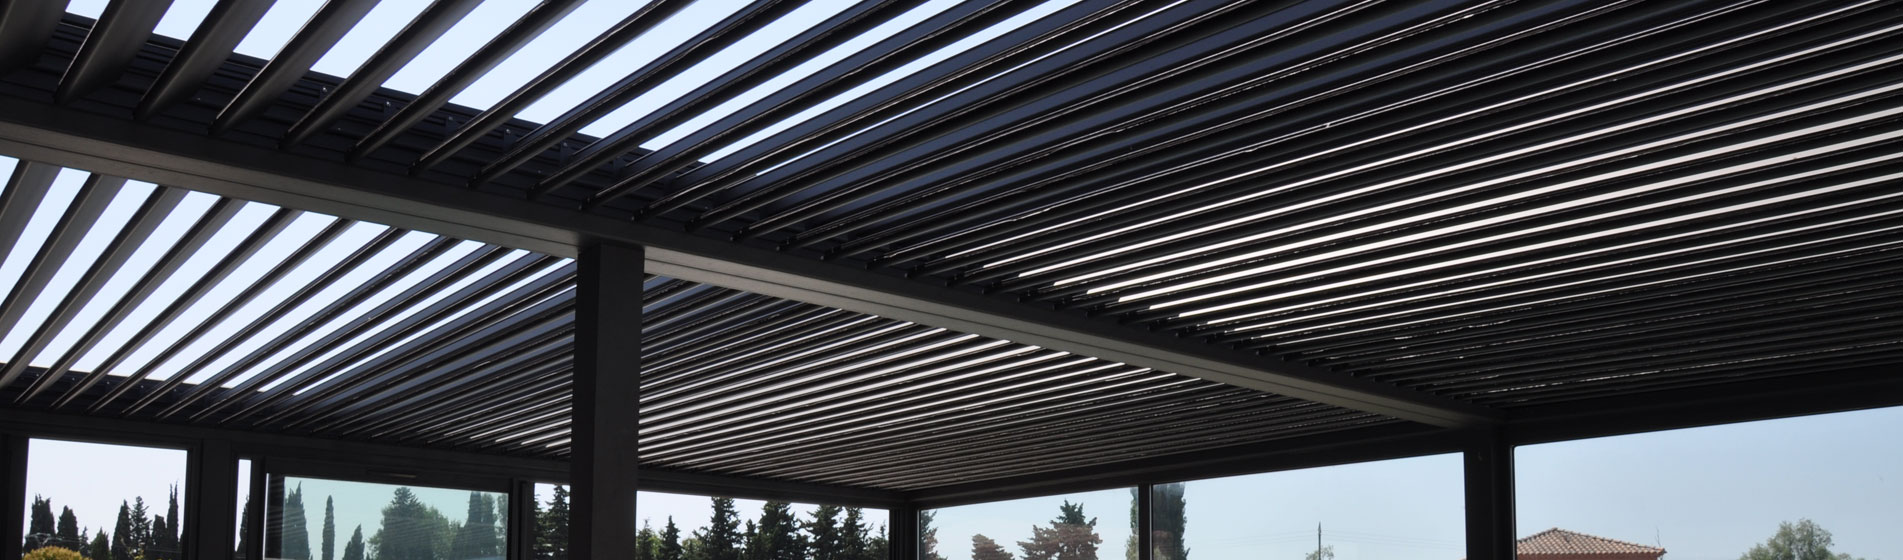 installer pergola terrasse Châteauneuf-le-Rouge